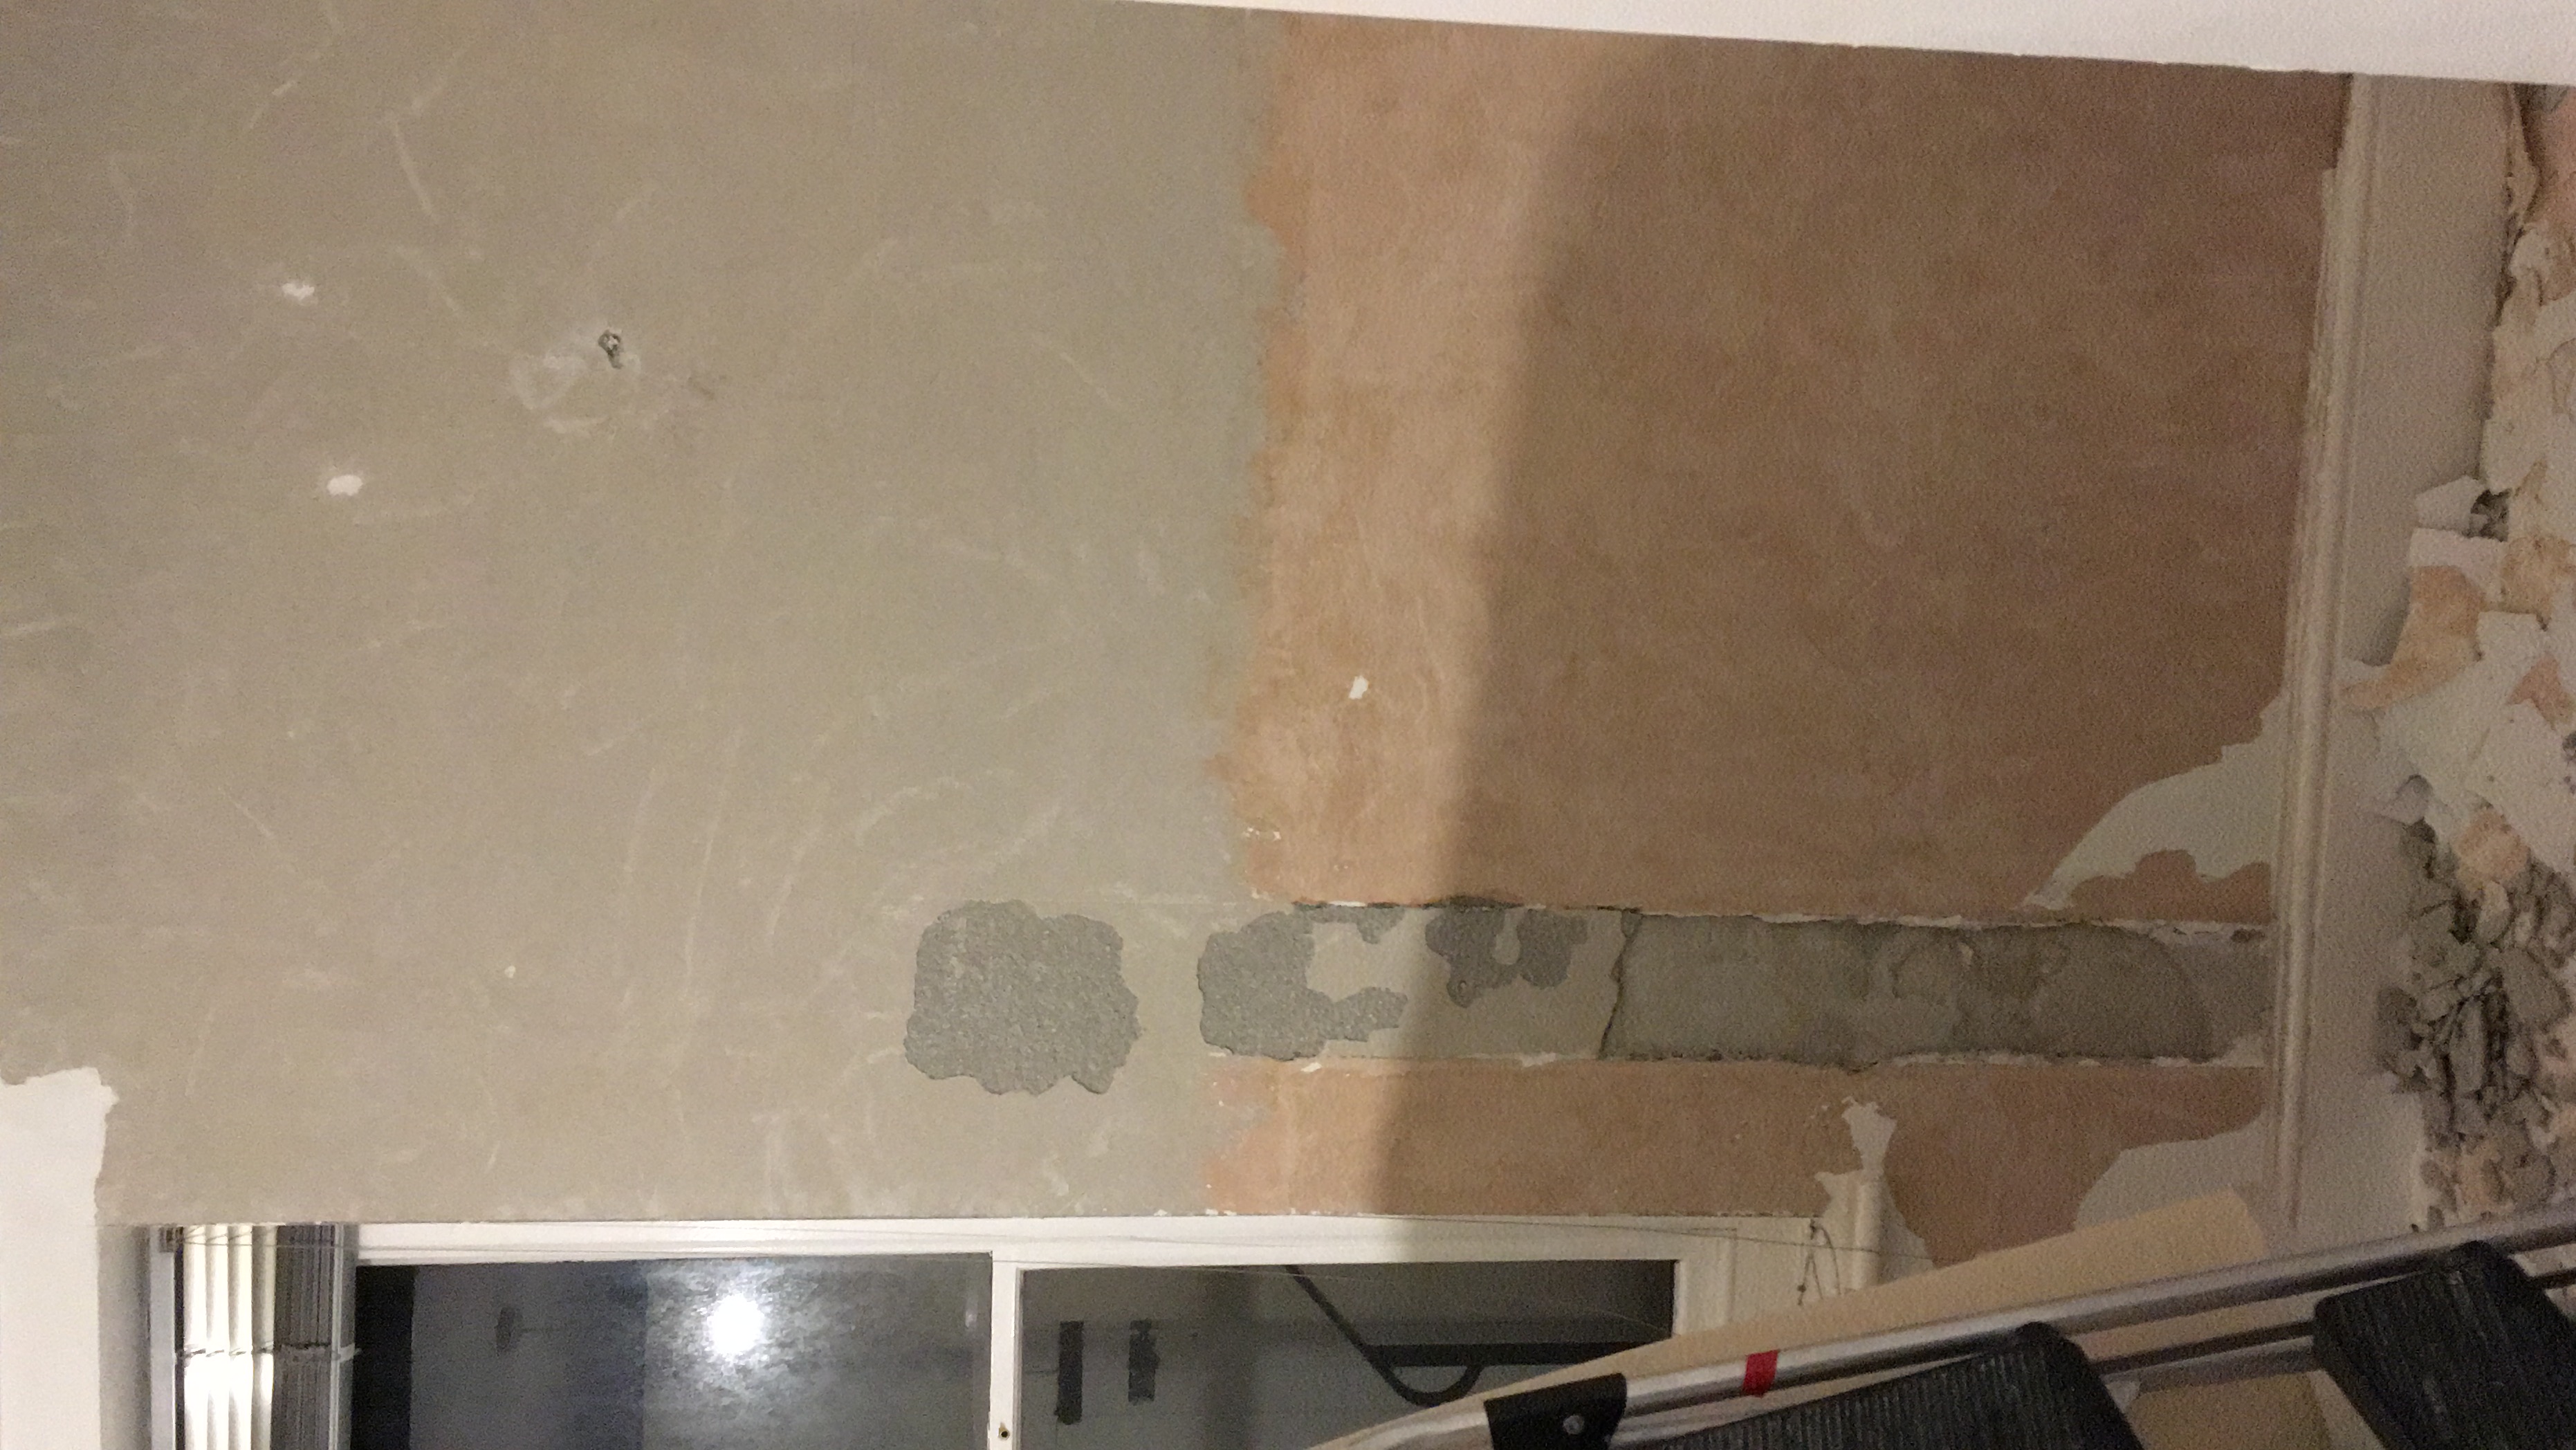 Using SBR and blue grit | The Original Plasterers Forum - The ...